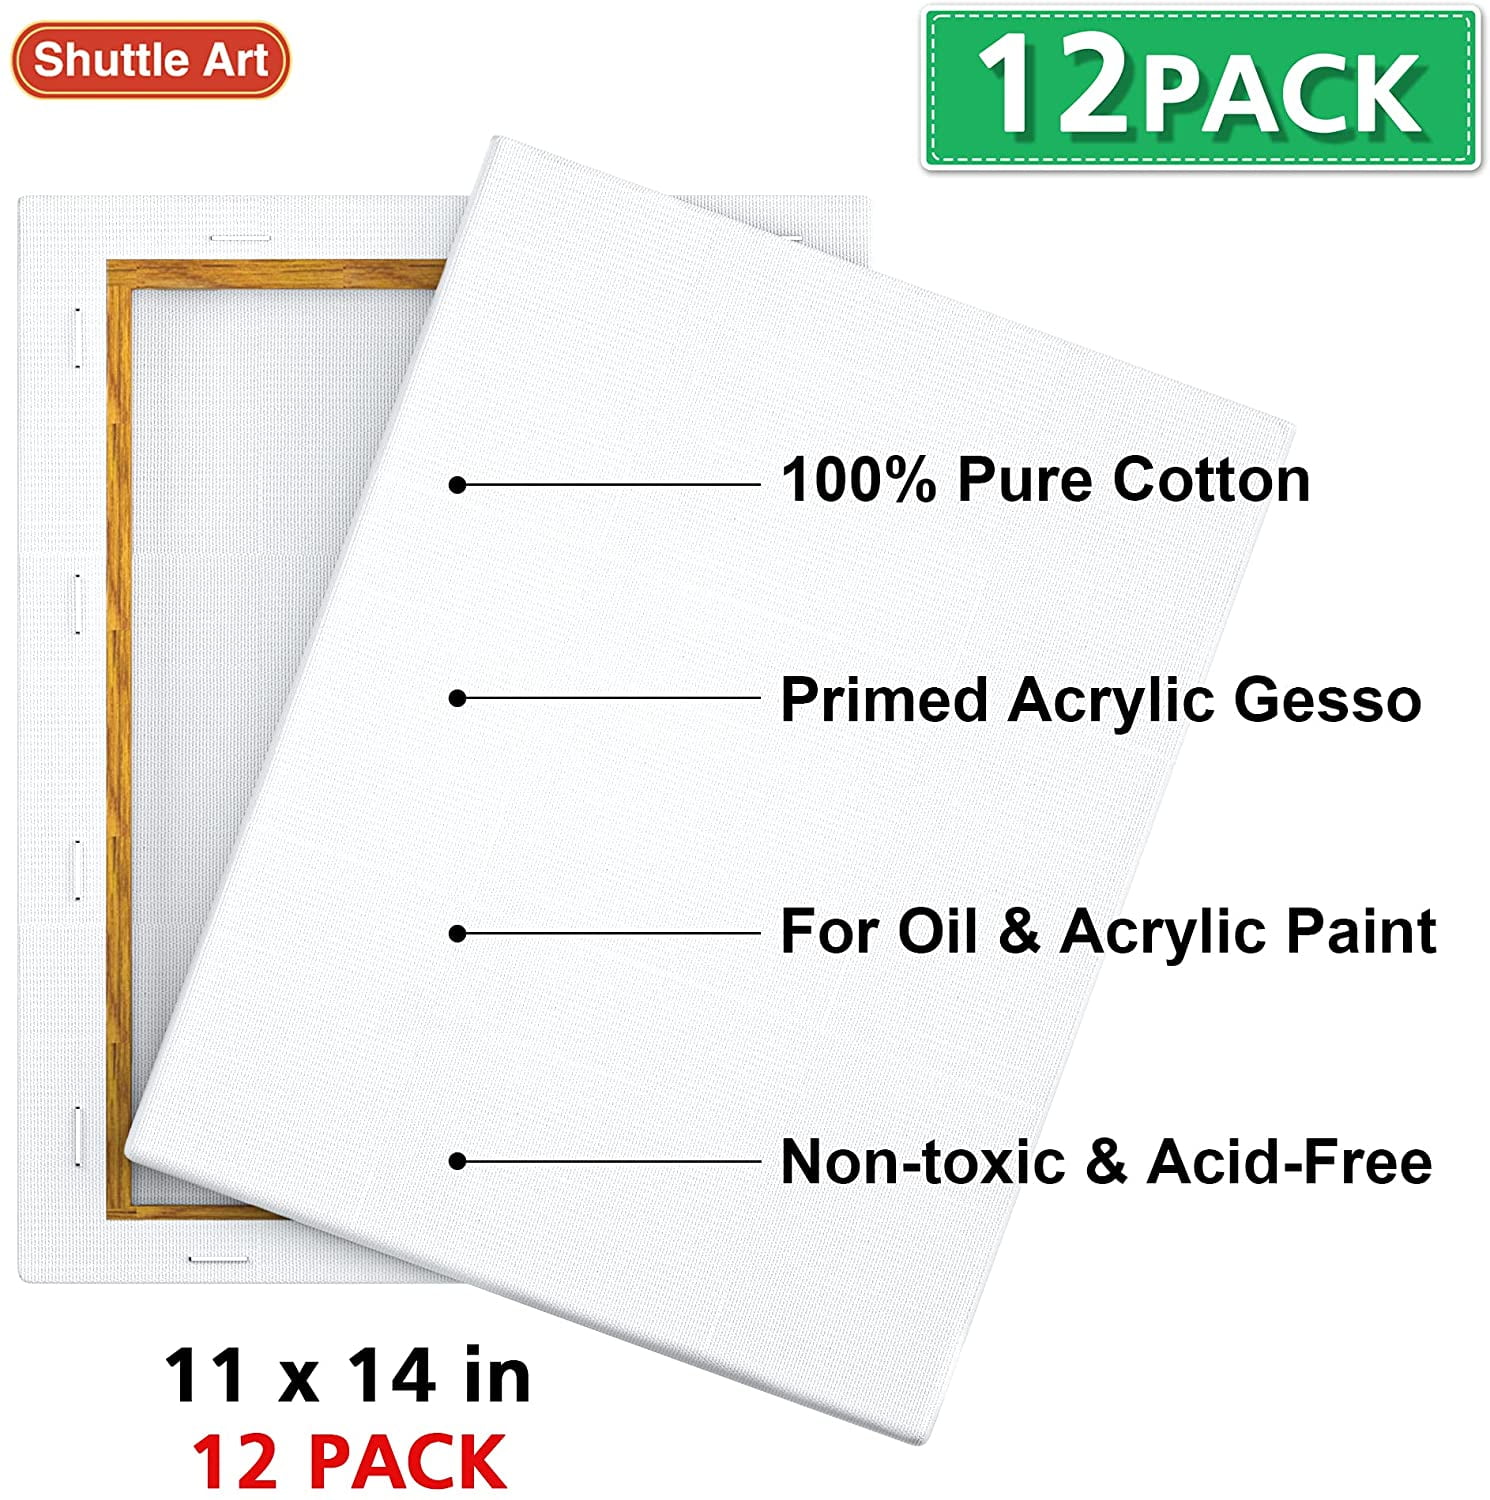  12 Pack Canvases for Painting with 11x14, Painting Canvas for  Oil & Acrylic Paint.